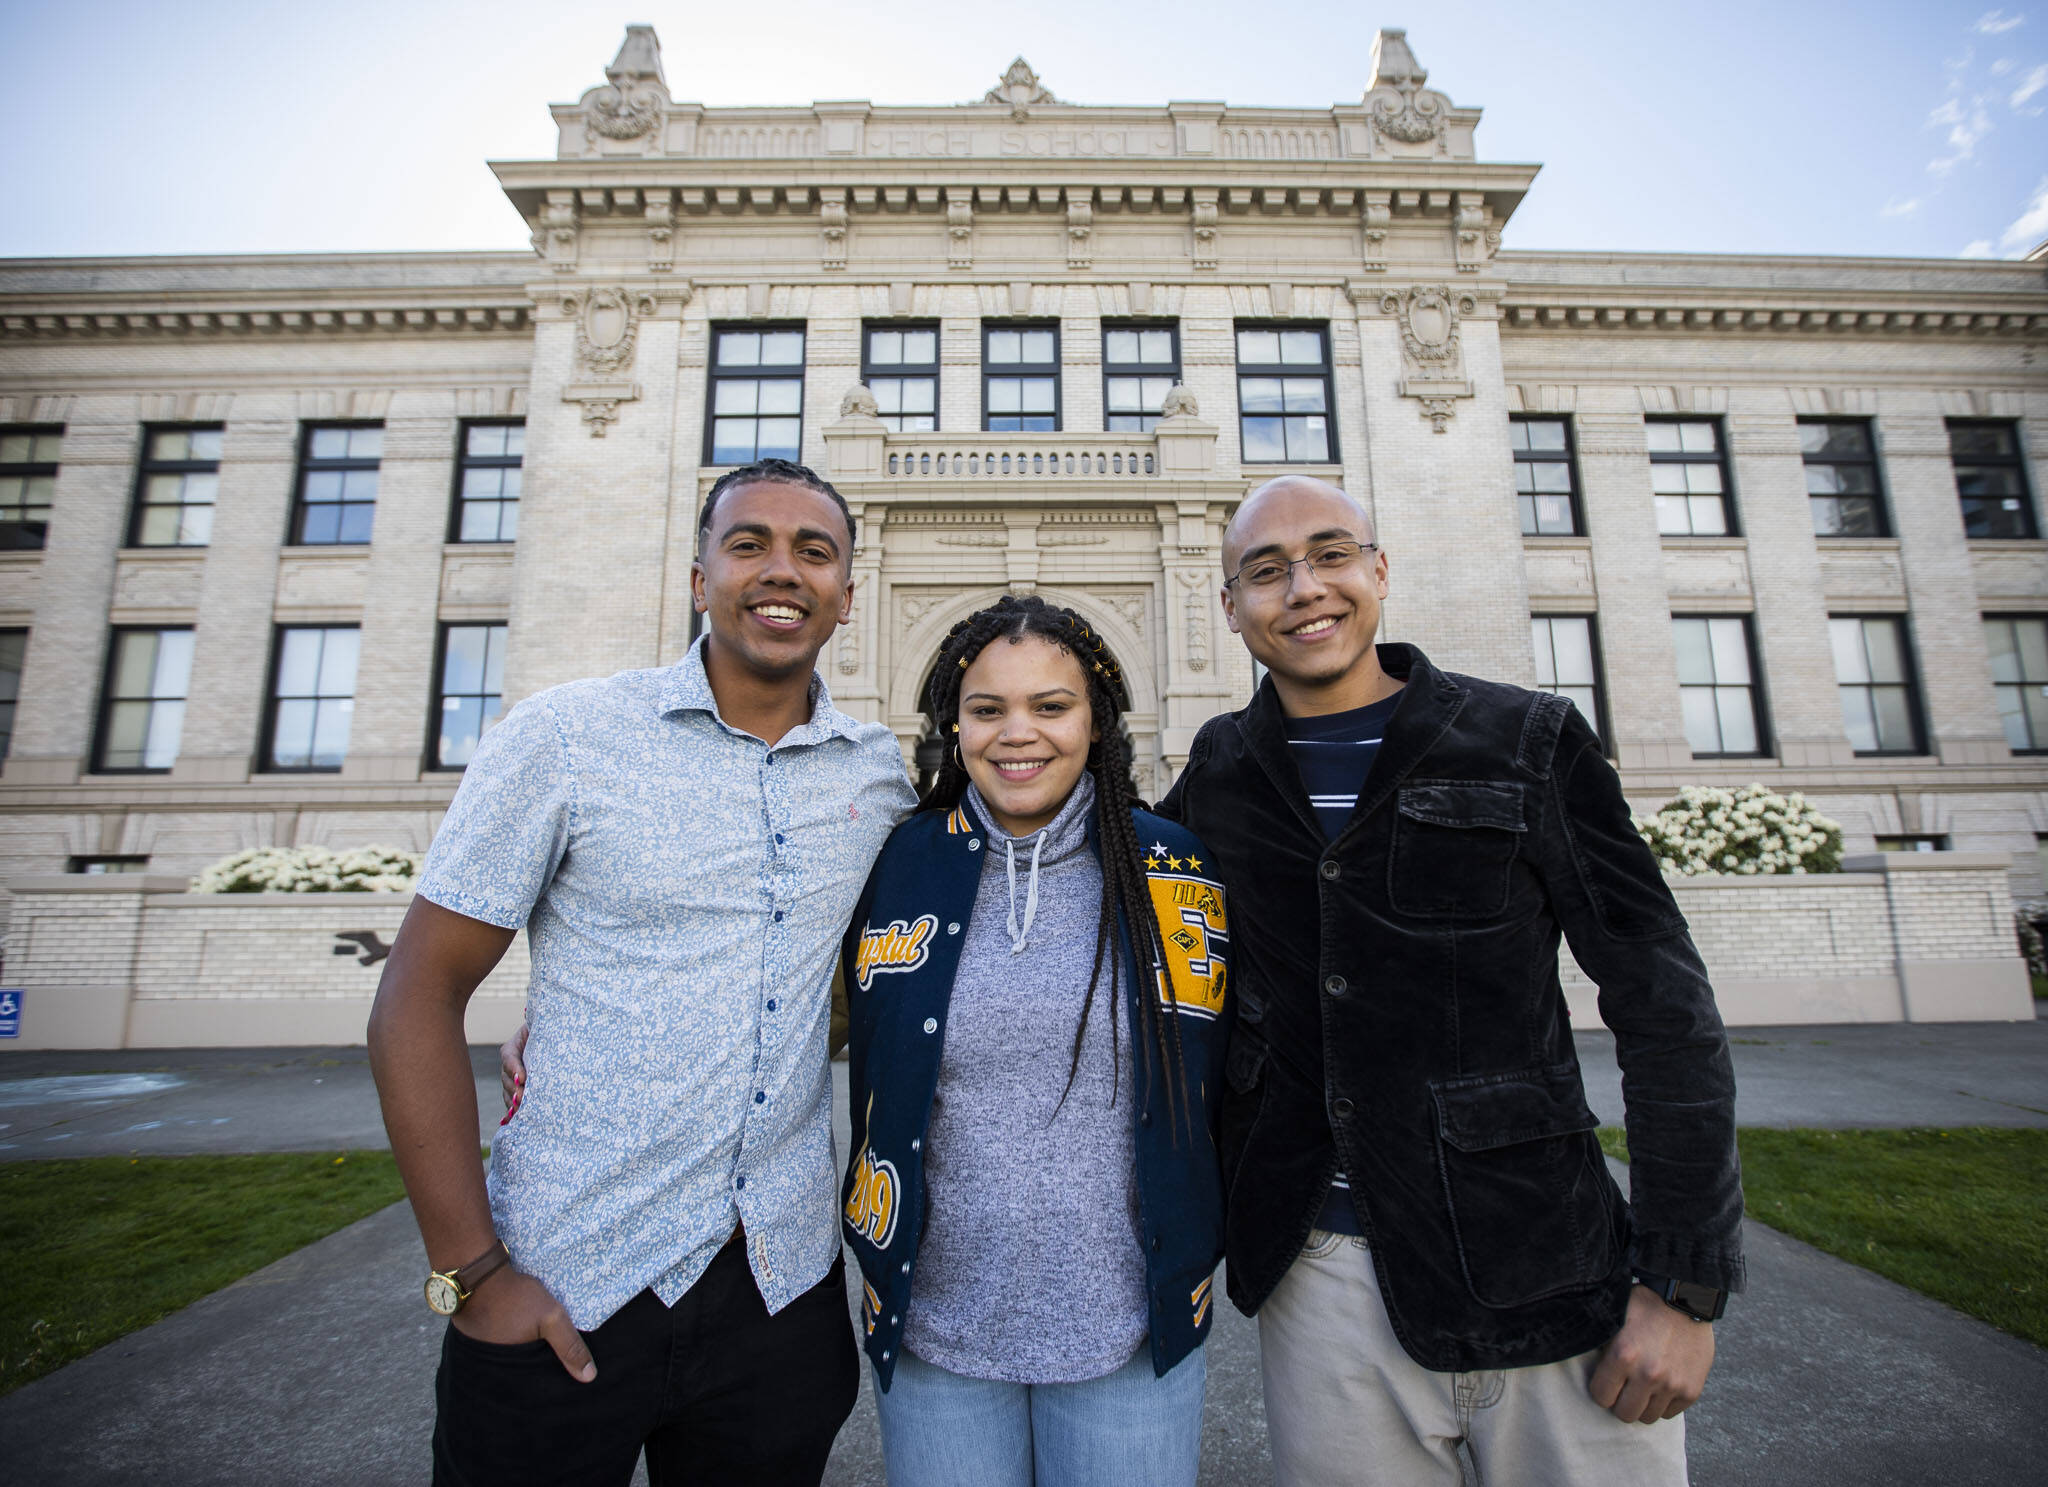 With help, they made it, so Everett High alums pay it forward